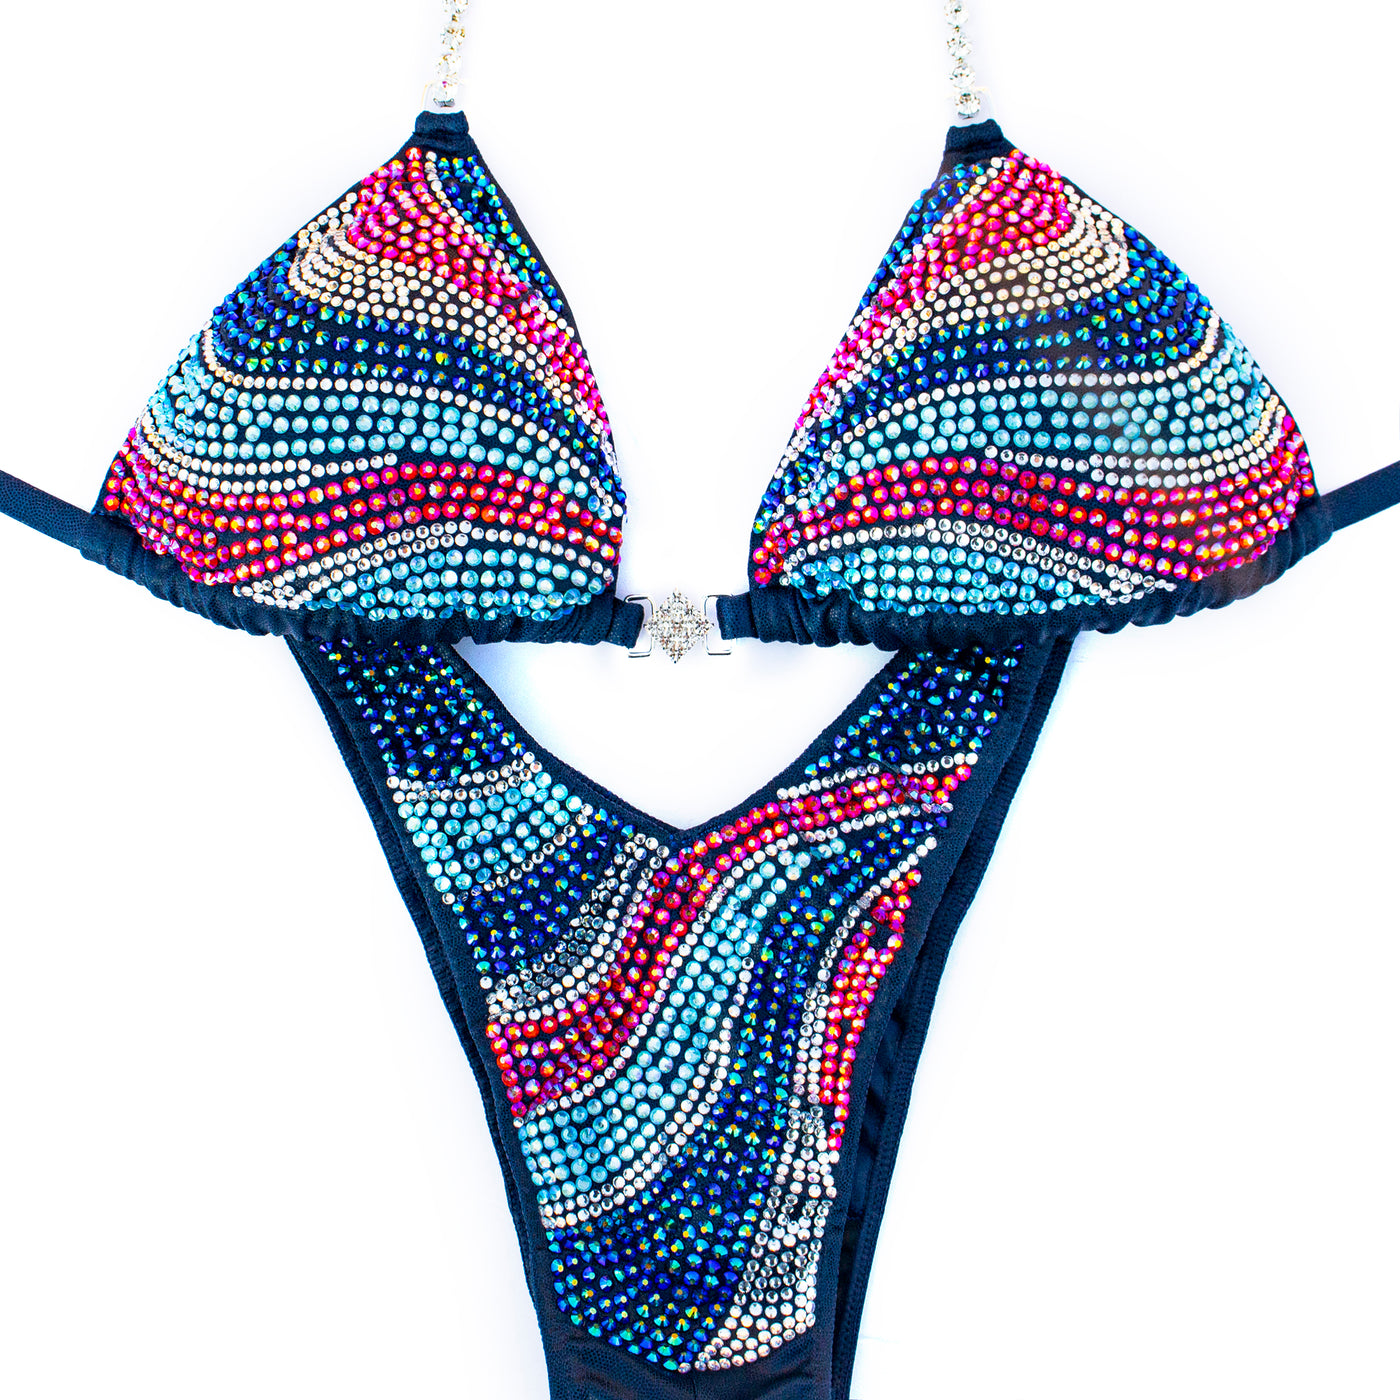 Keira Figure/WPD Competition Suit | OMG Bikinis